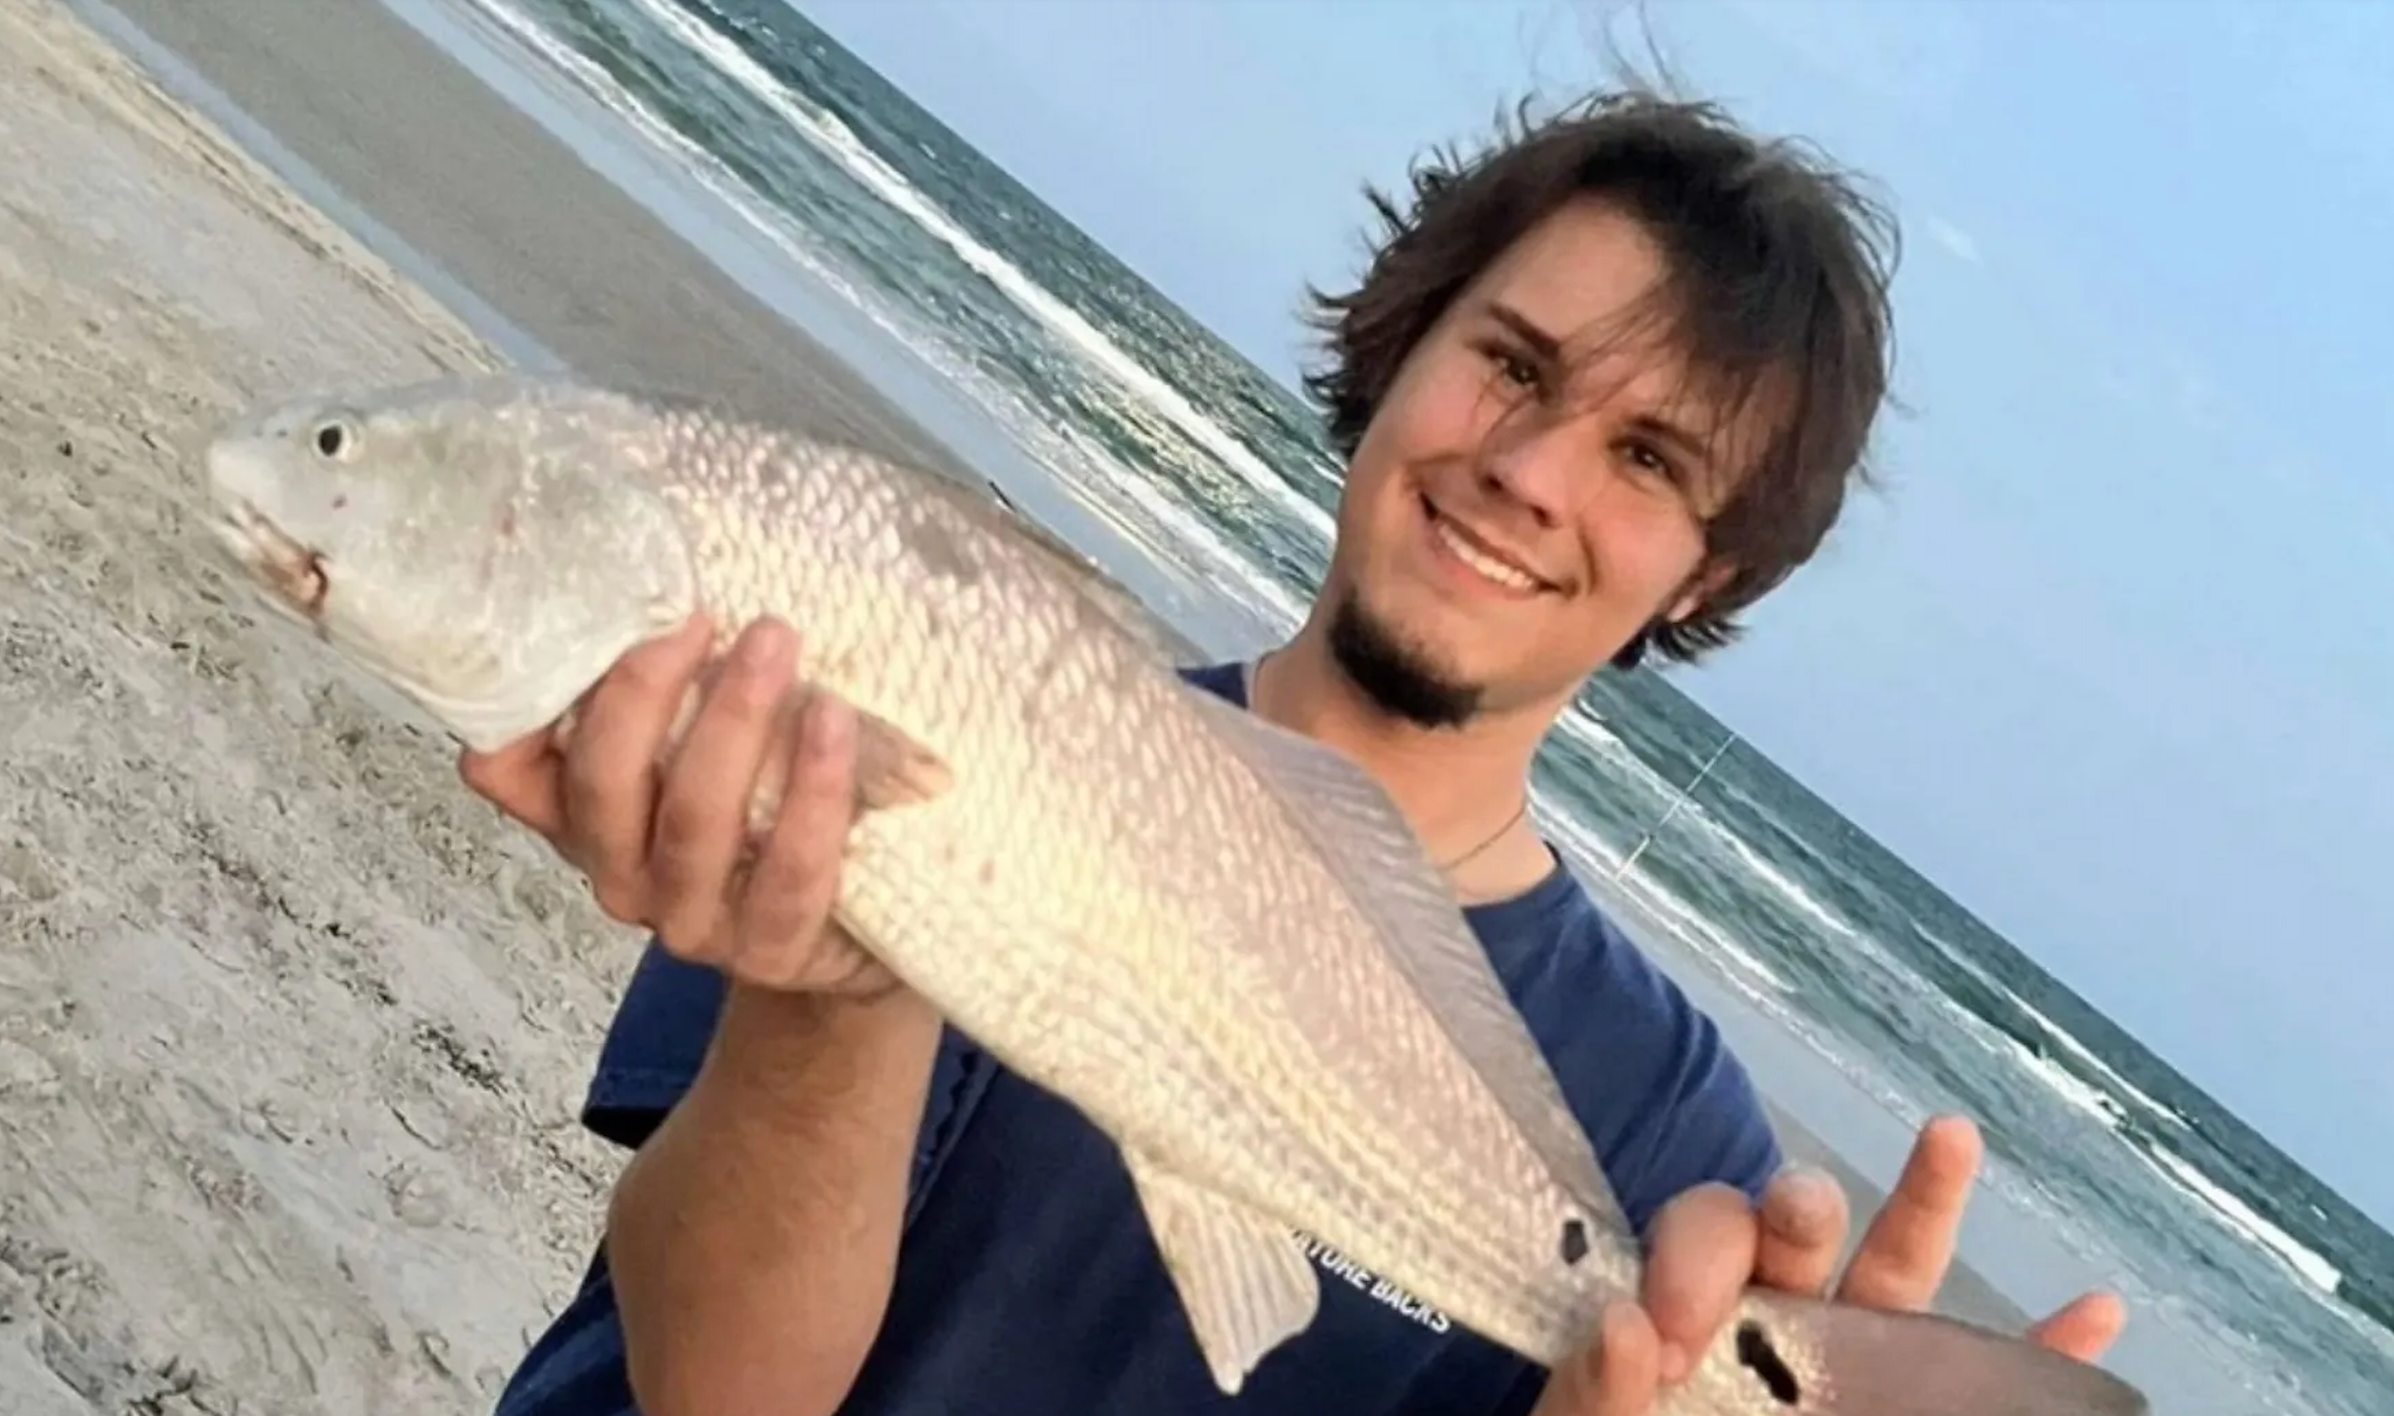 Caleb Harris, a 21-year-old Texas A&M student, has been missing since March 4. Police said they have found human remains near his apartment complex